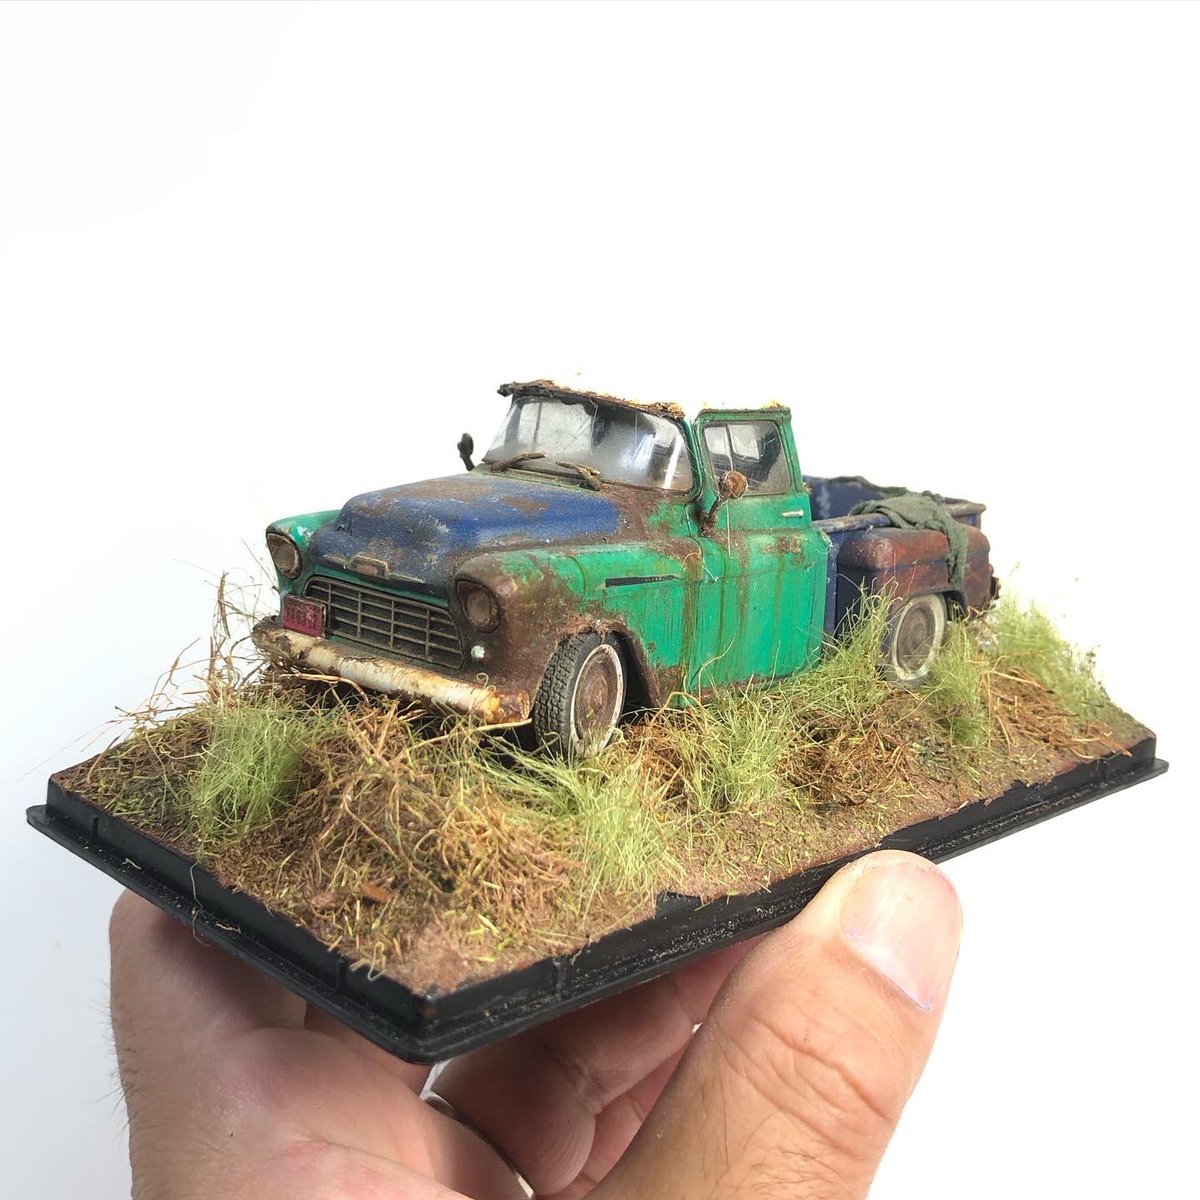 1/43 Abandoned “stilllife” diorama with chevy truck. #chevrolet instagram.com/p/Cx-6H9Fp4Dc/…